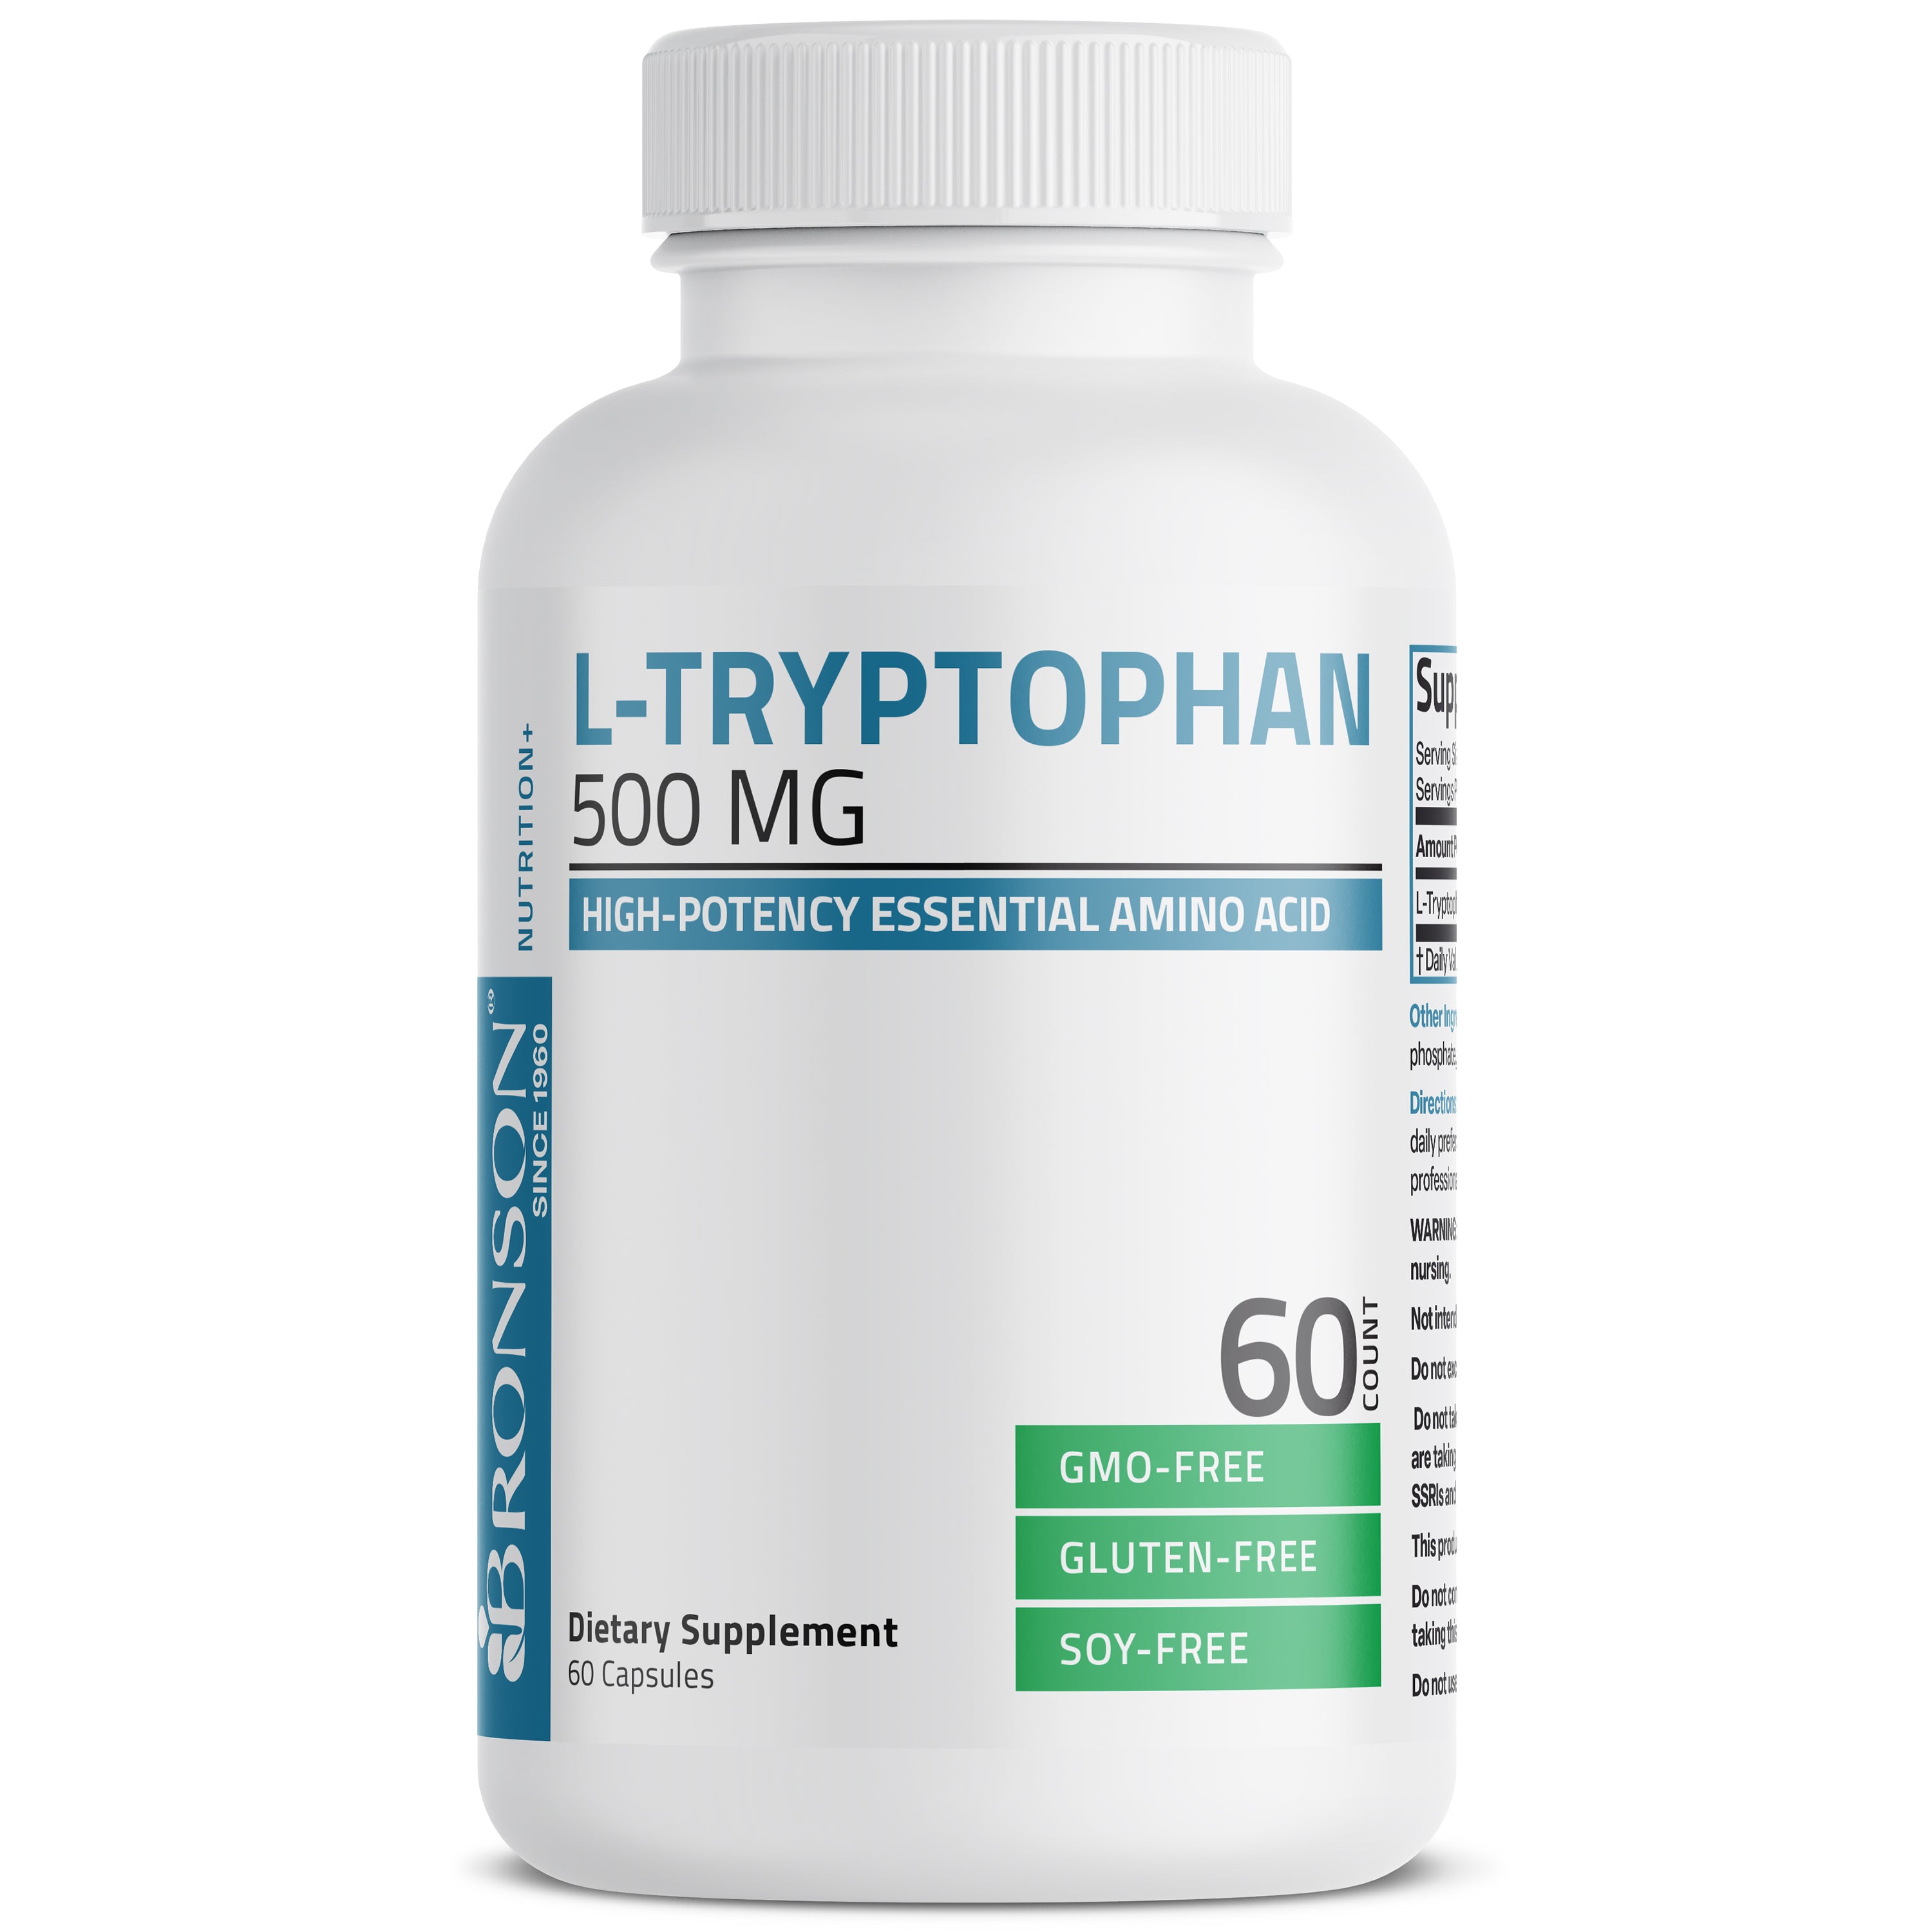 L-Tryptophan 500 MG view 1 of 8